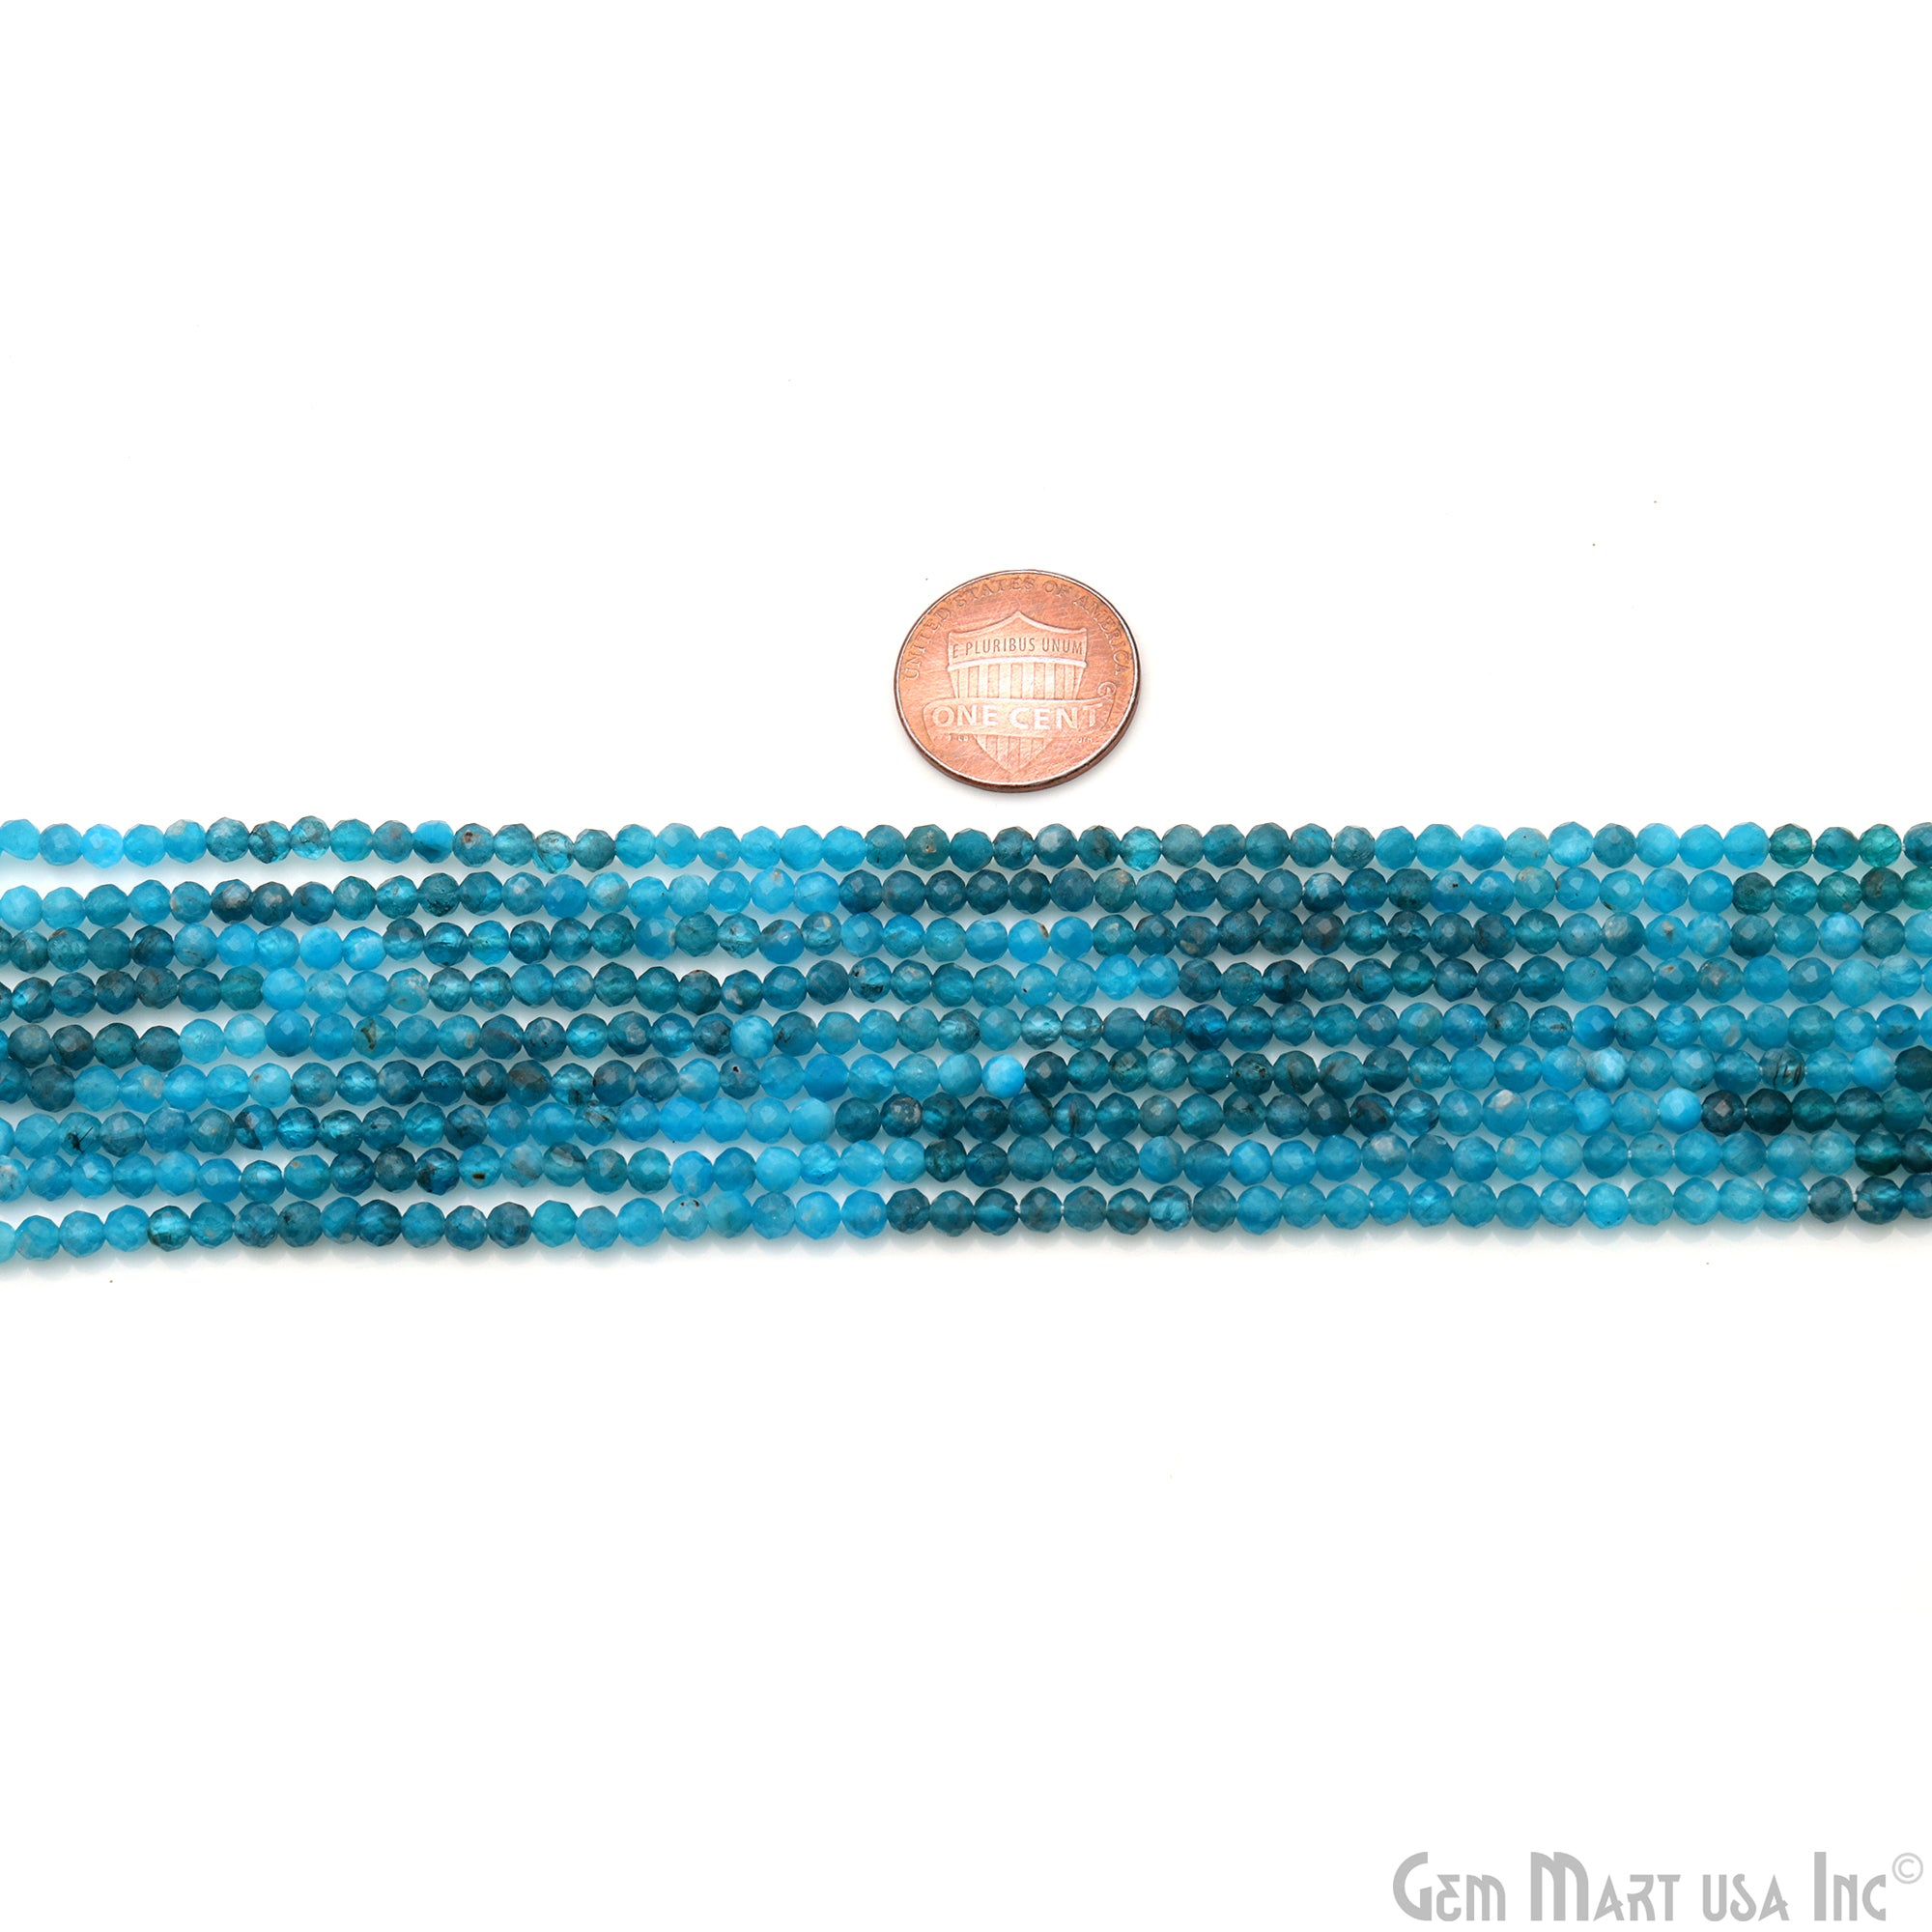 Neon Apatite Shaded 3mm Faceted Gemstone Rondelle Beads 1 Strand